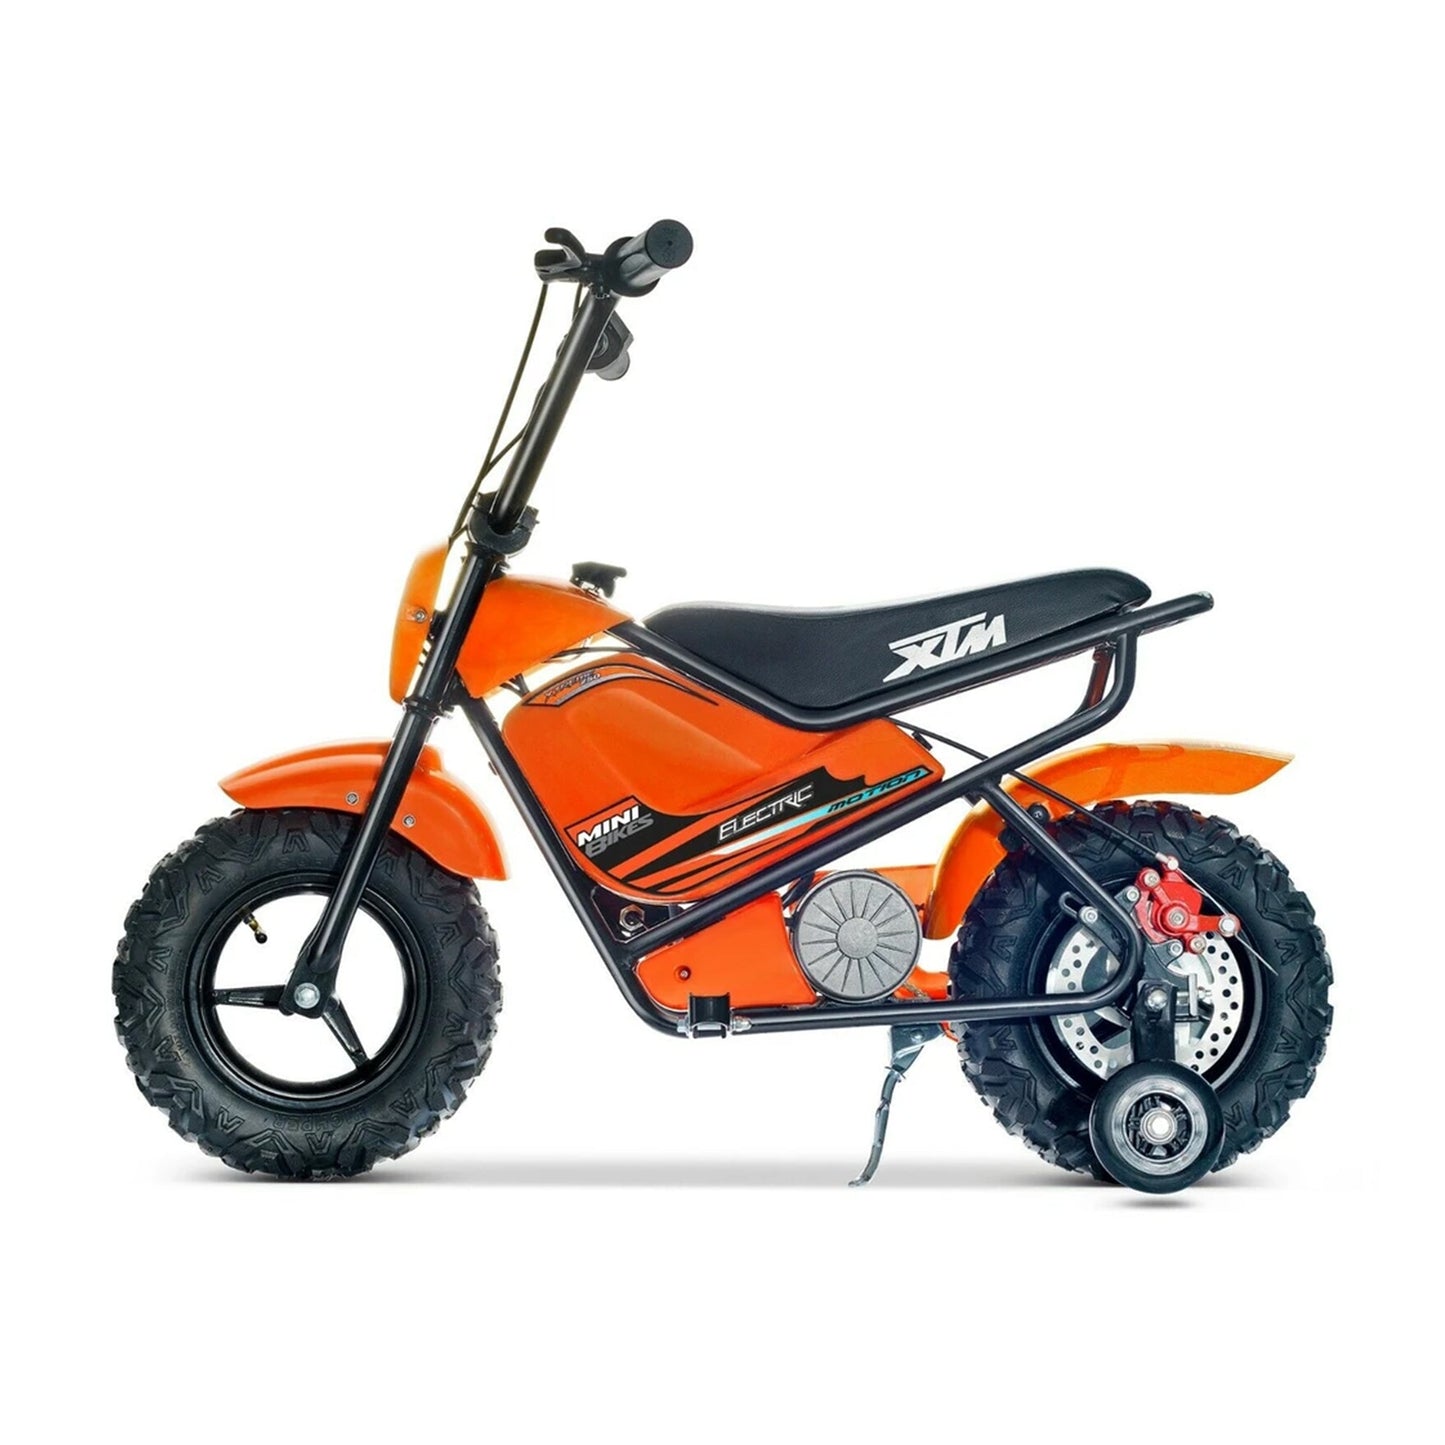 "Small orange Mini Dirtbike Scrambler for kids, 250 Watt 12 Volt electric ride on with twist and go throttle, isolated on white background."